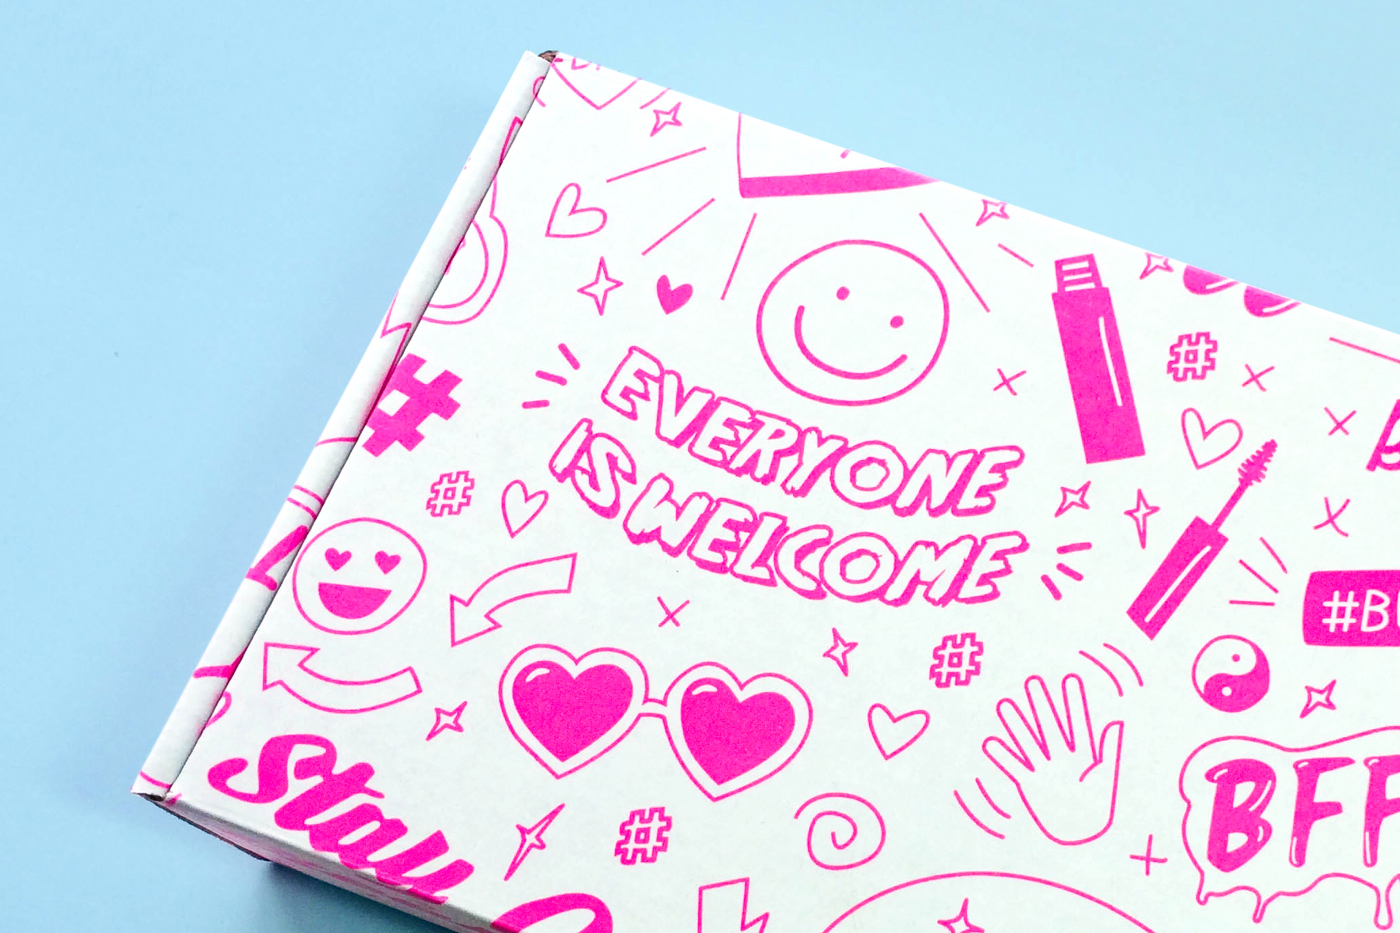 bff subscription box beauty icons Emojis makeup hand drawn Style package pink doodles neon